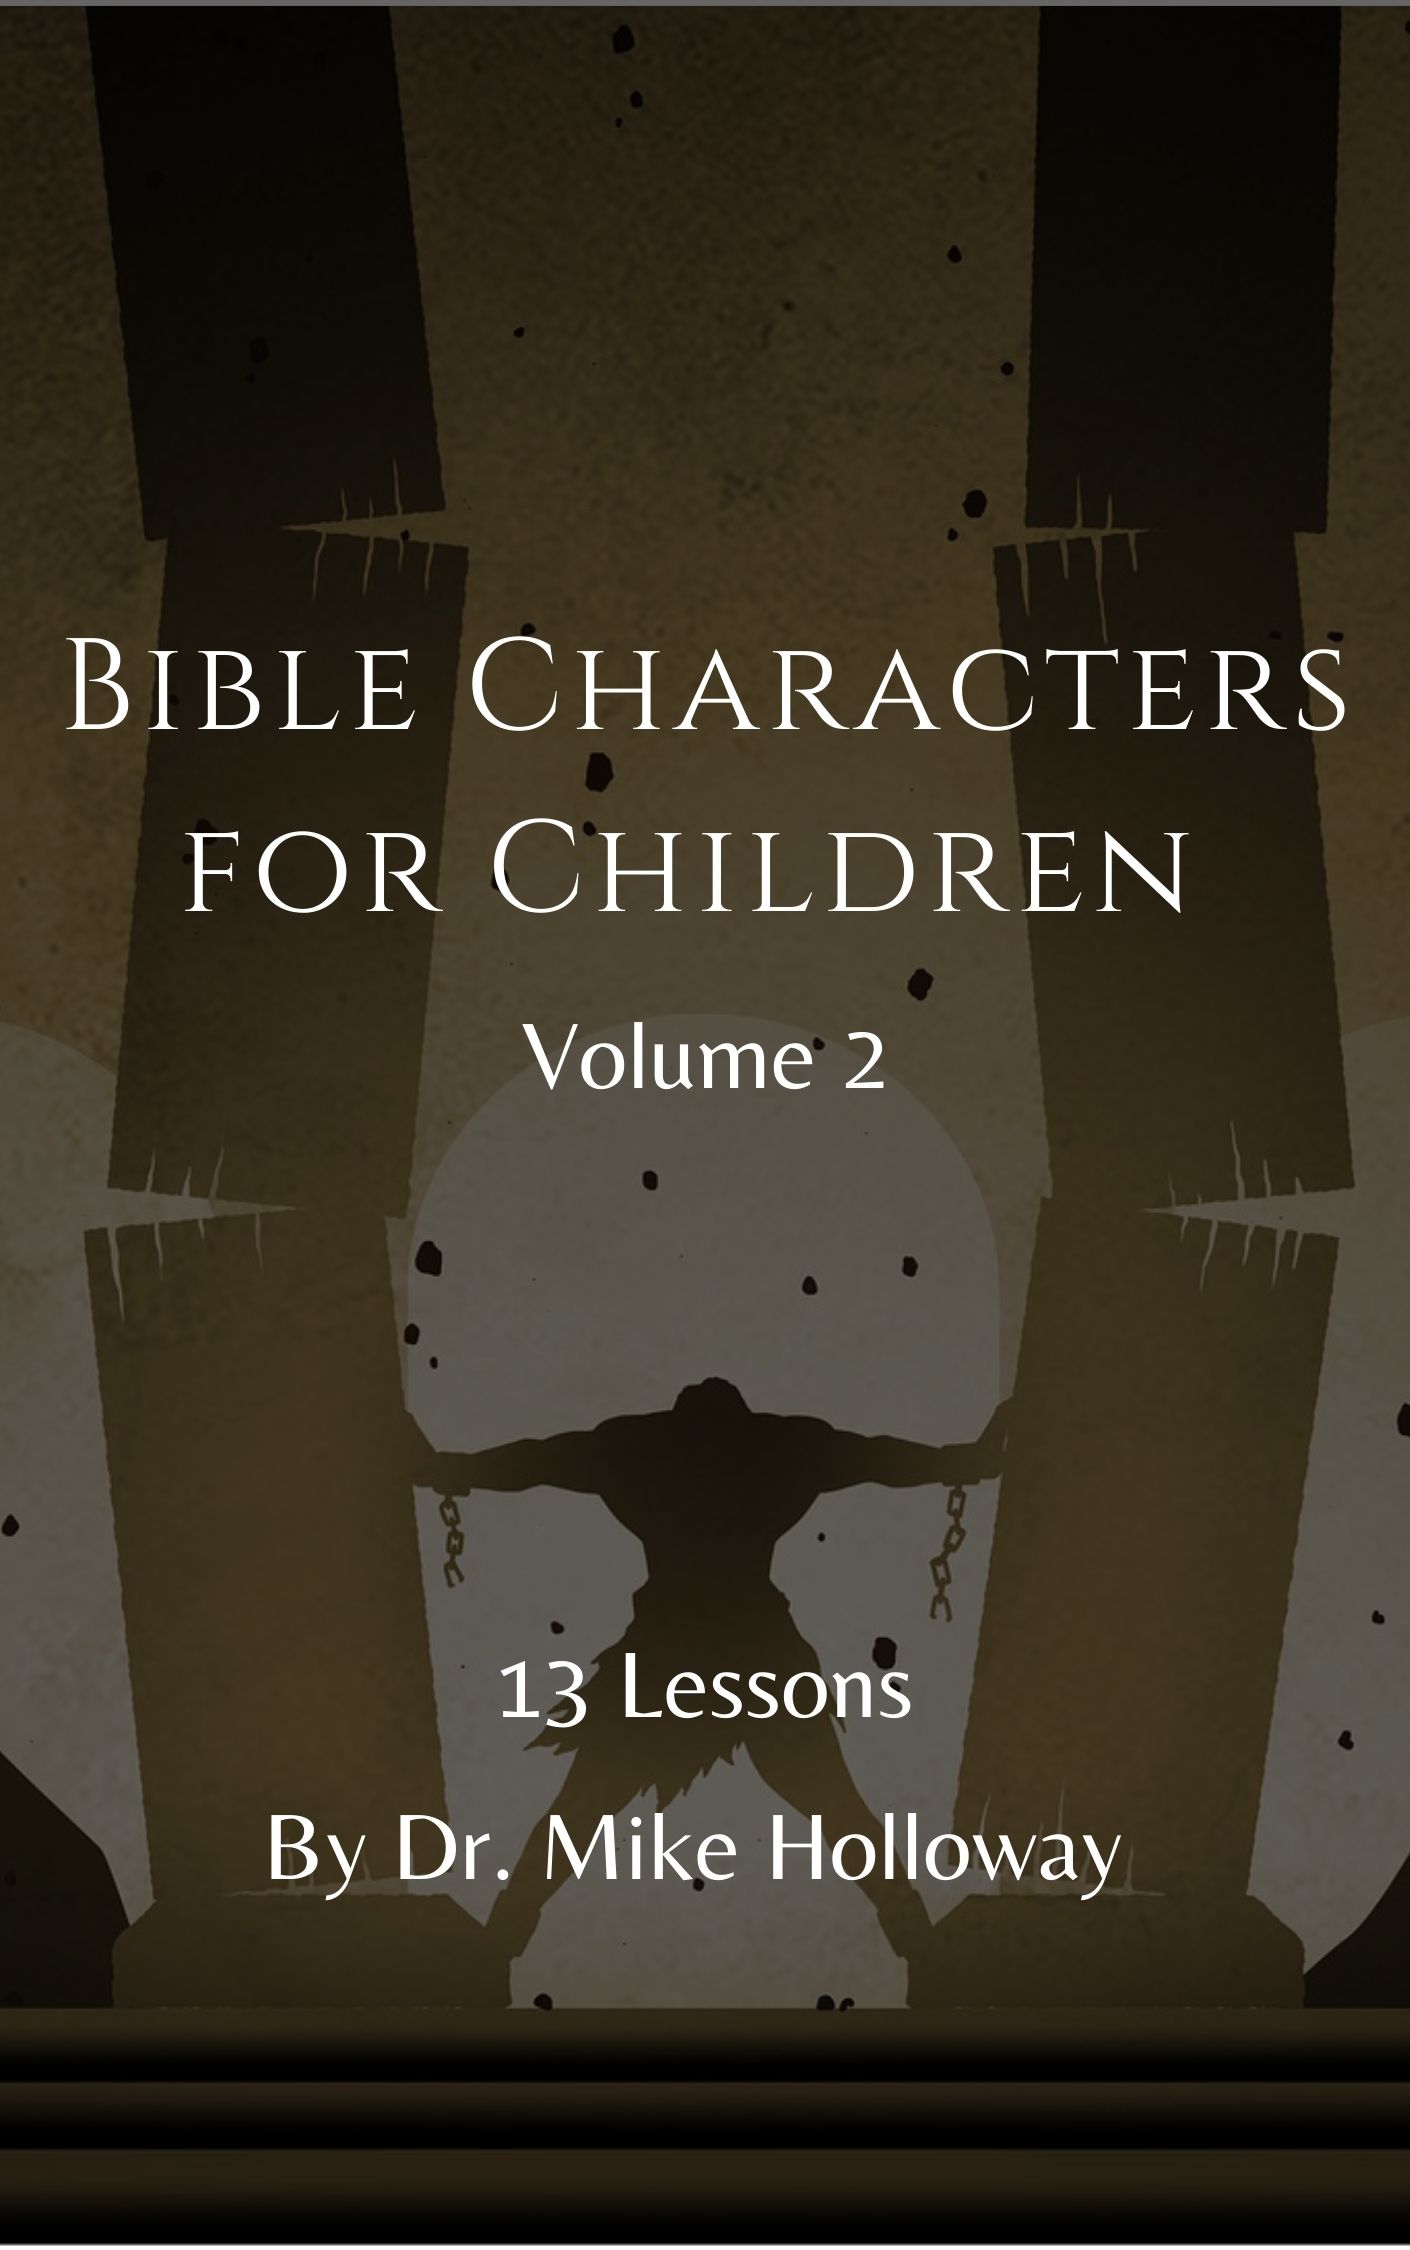 Bible Characters for Children – Volume 2